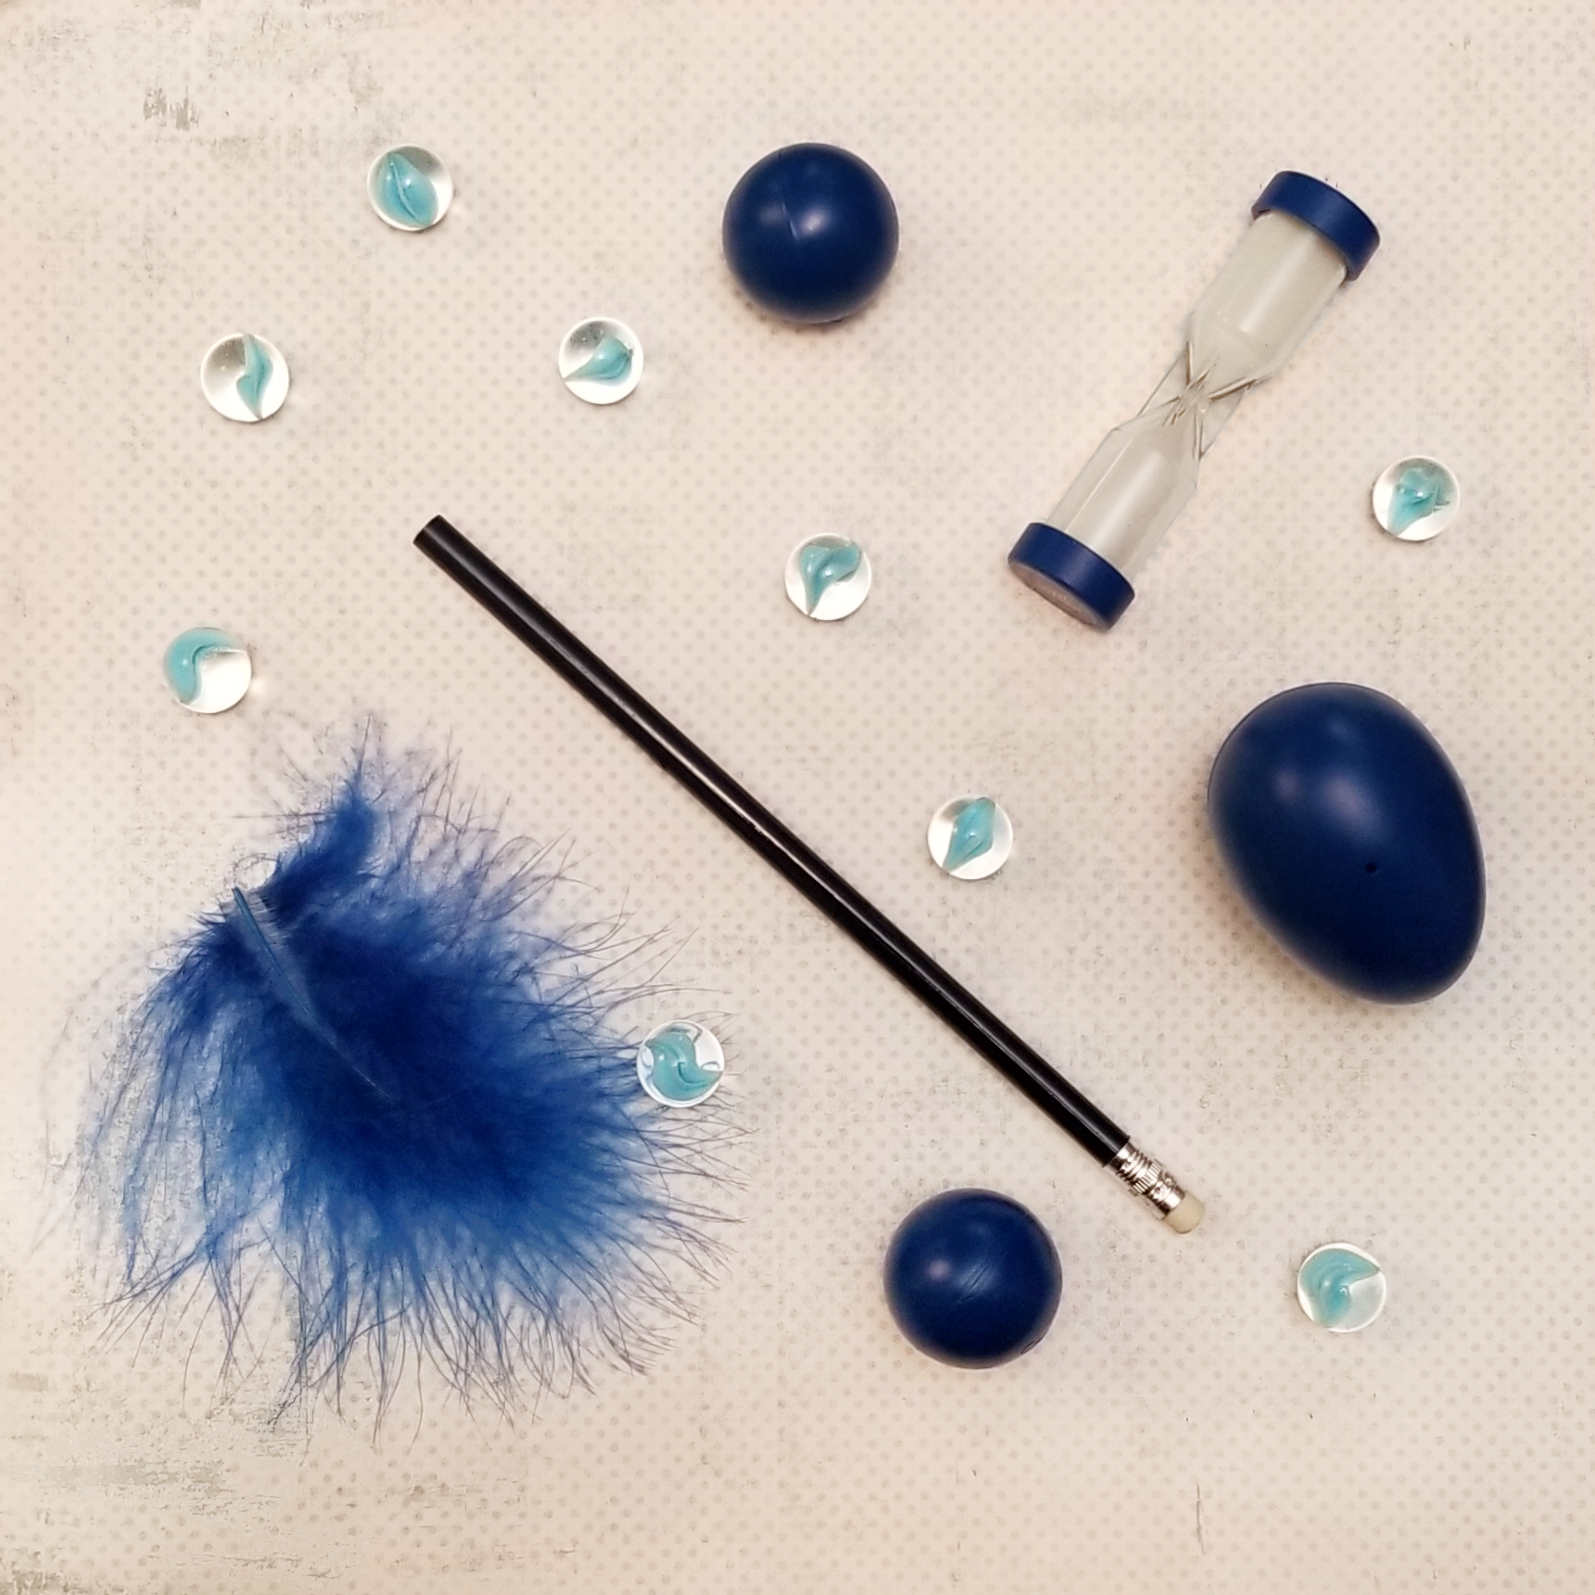 An image of various game props for Minute to Win It games, including a feather, marbles, a pencil, plastic egg, and minute timer.